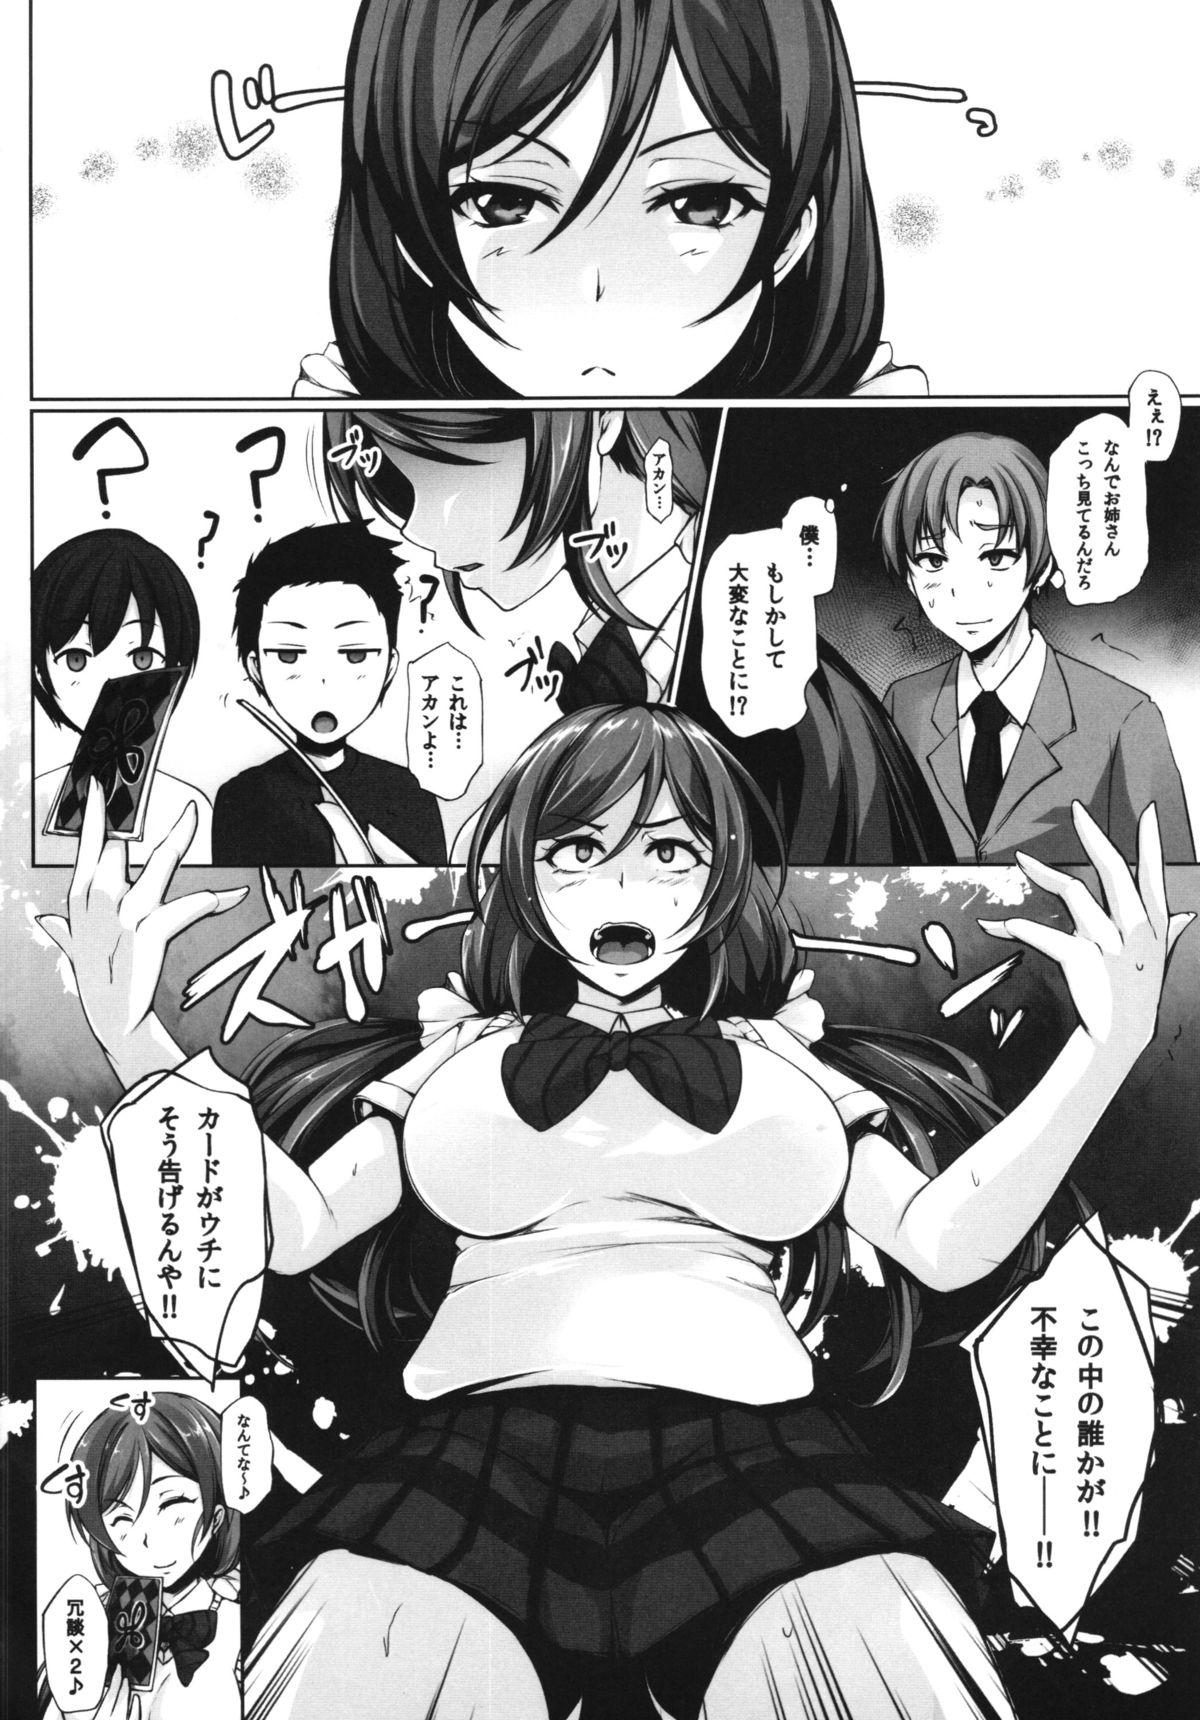 Star LOVE-MIX! - Love live Topless - Page 4